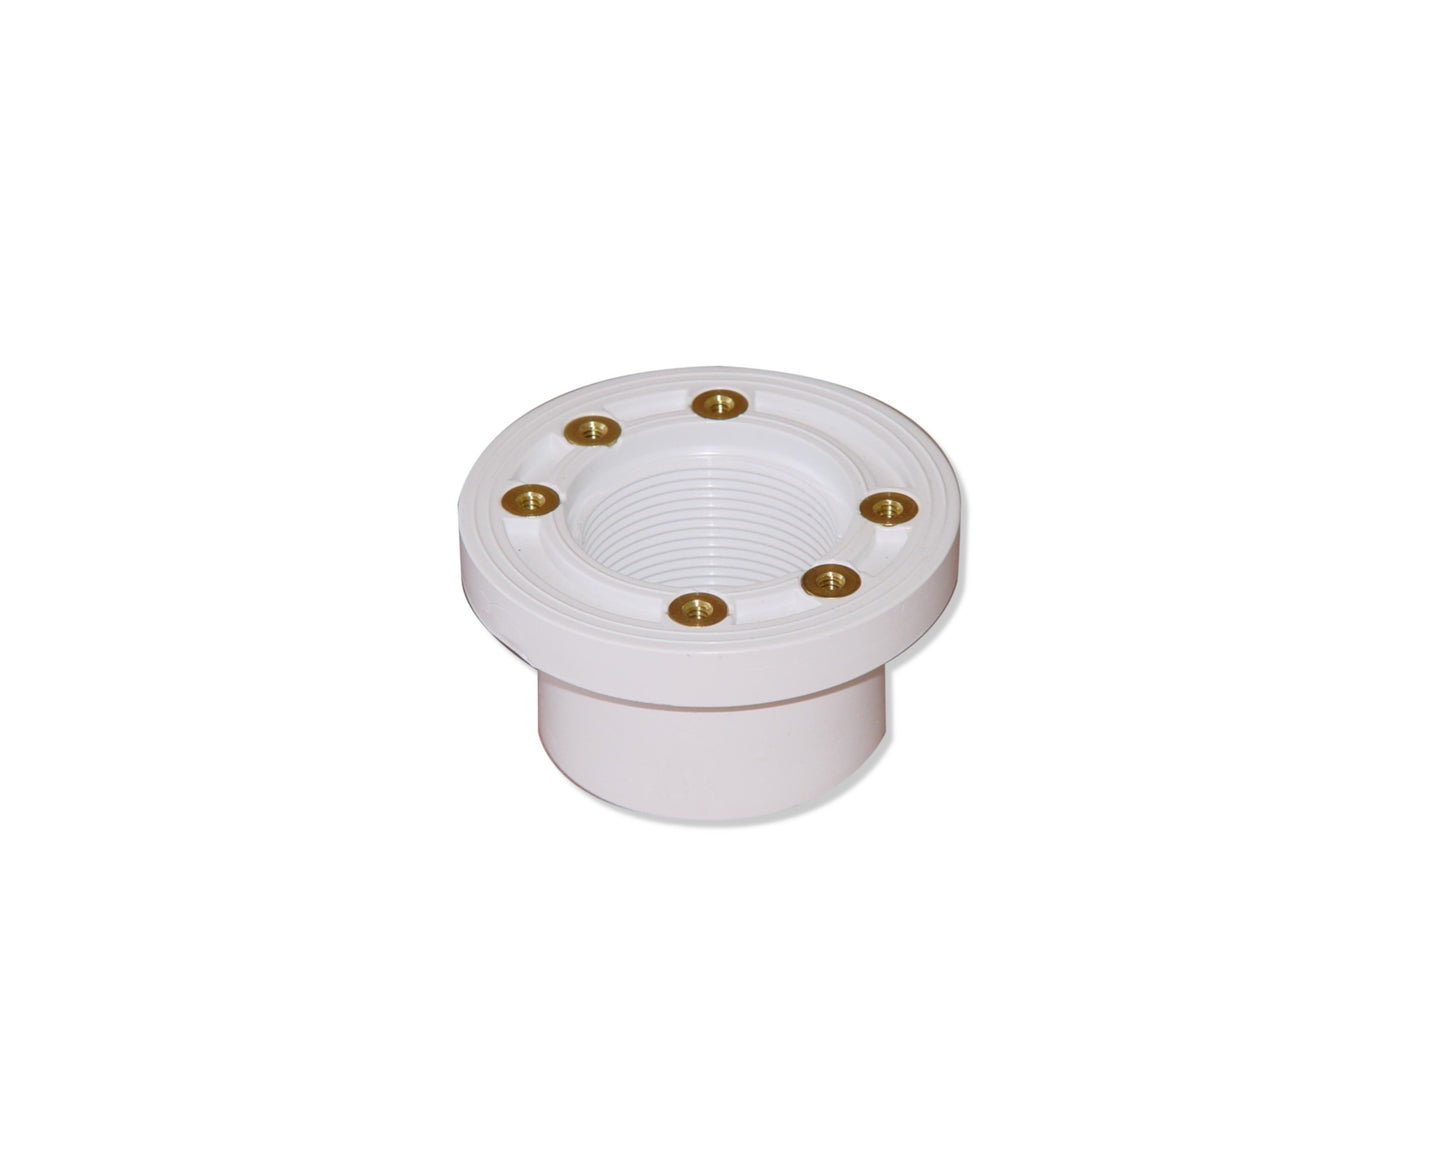 Afras FIP Inlet/Outlet Fitting for Vinyl, Fiberglass and Steel Pools